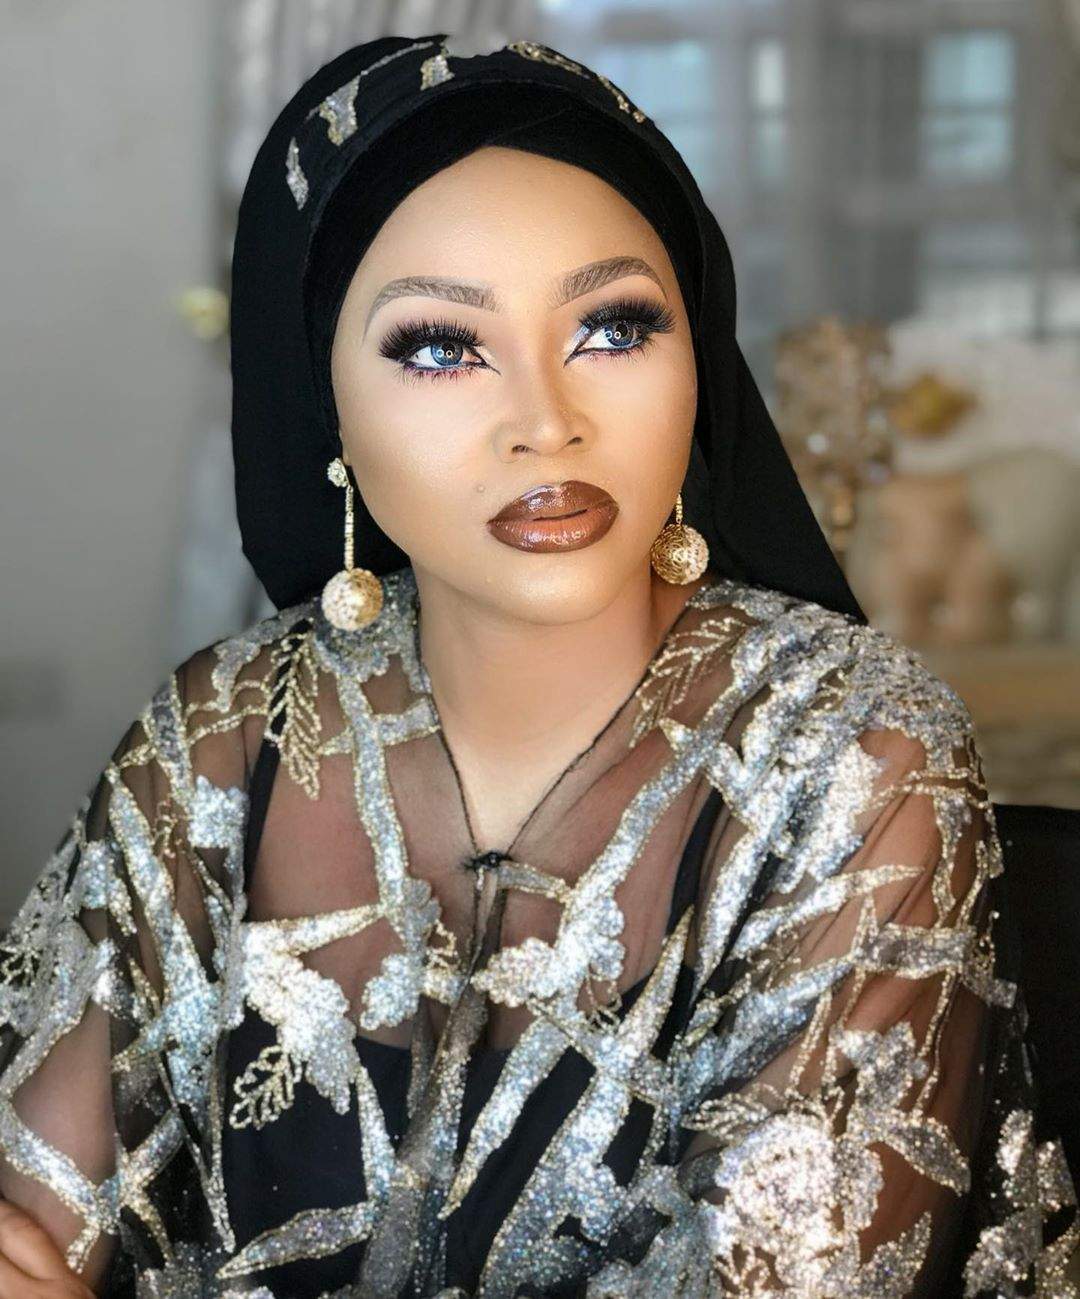 I want to meet Wizkid or Larry Gaaga, or both, their song turns me on - Mercy Aigbe says